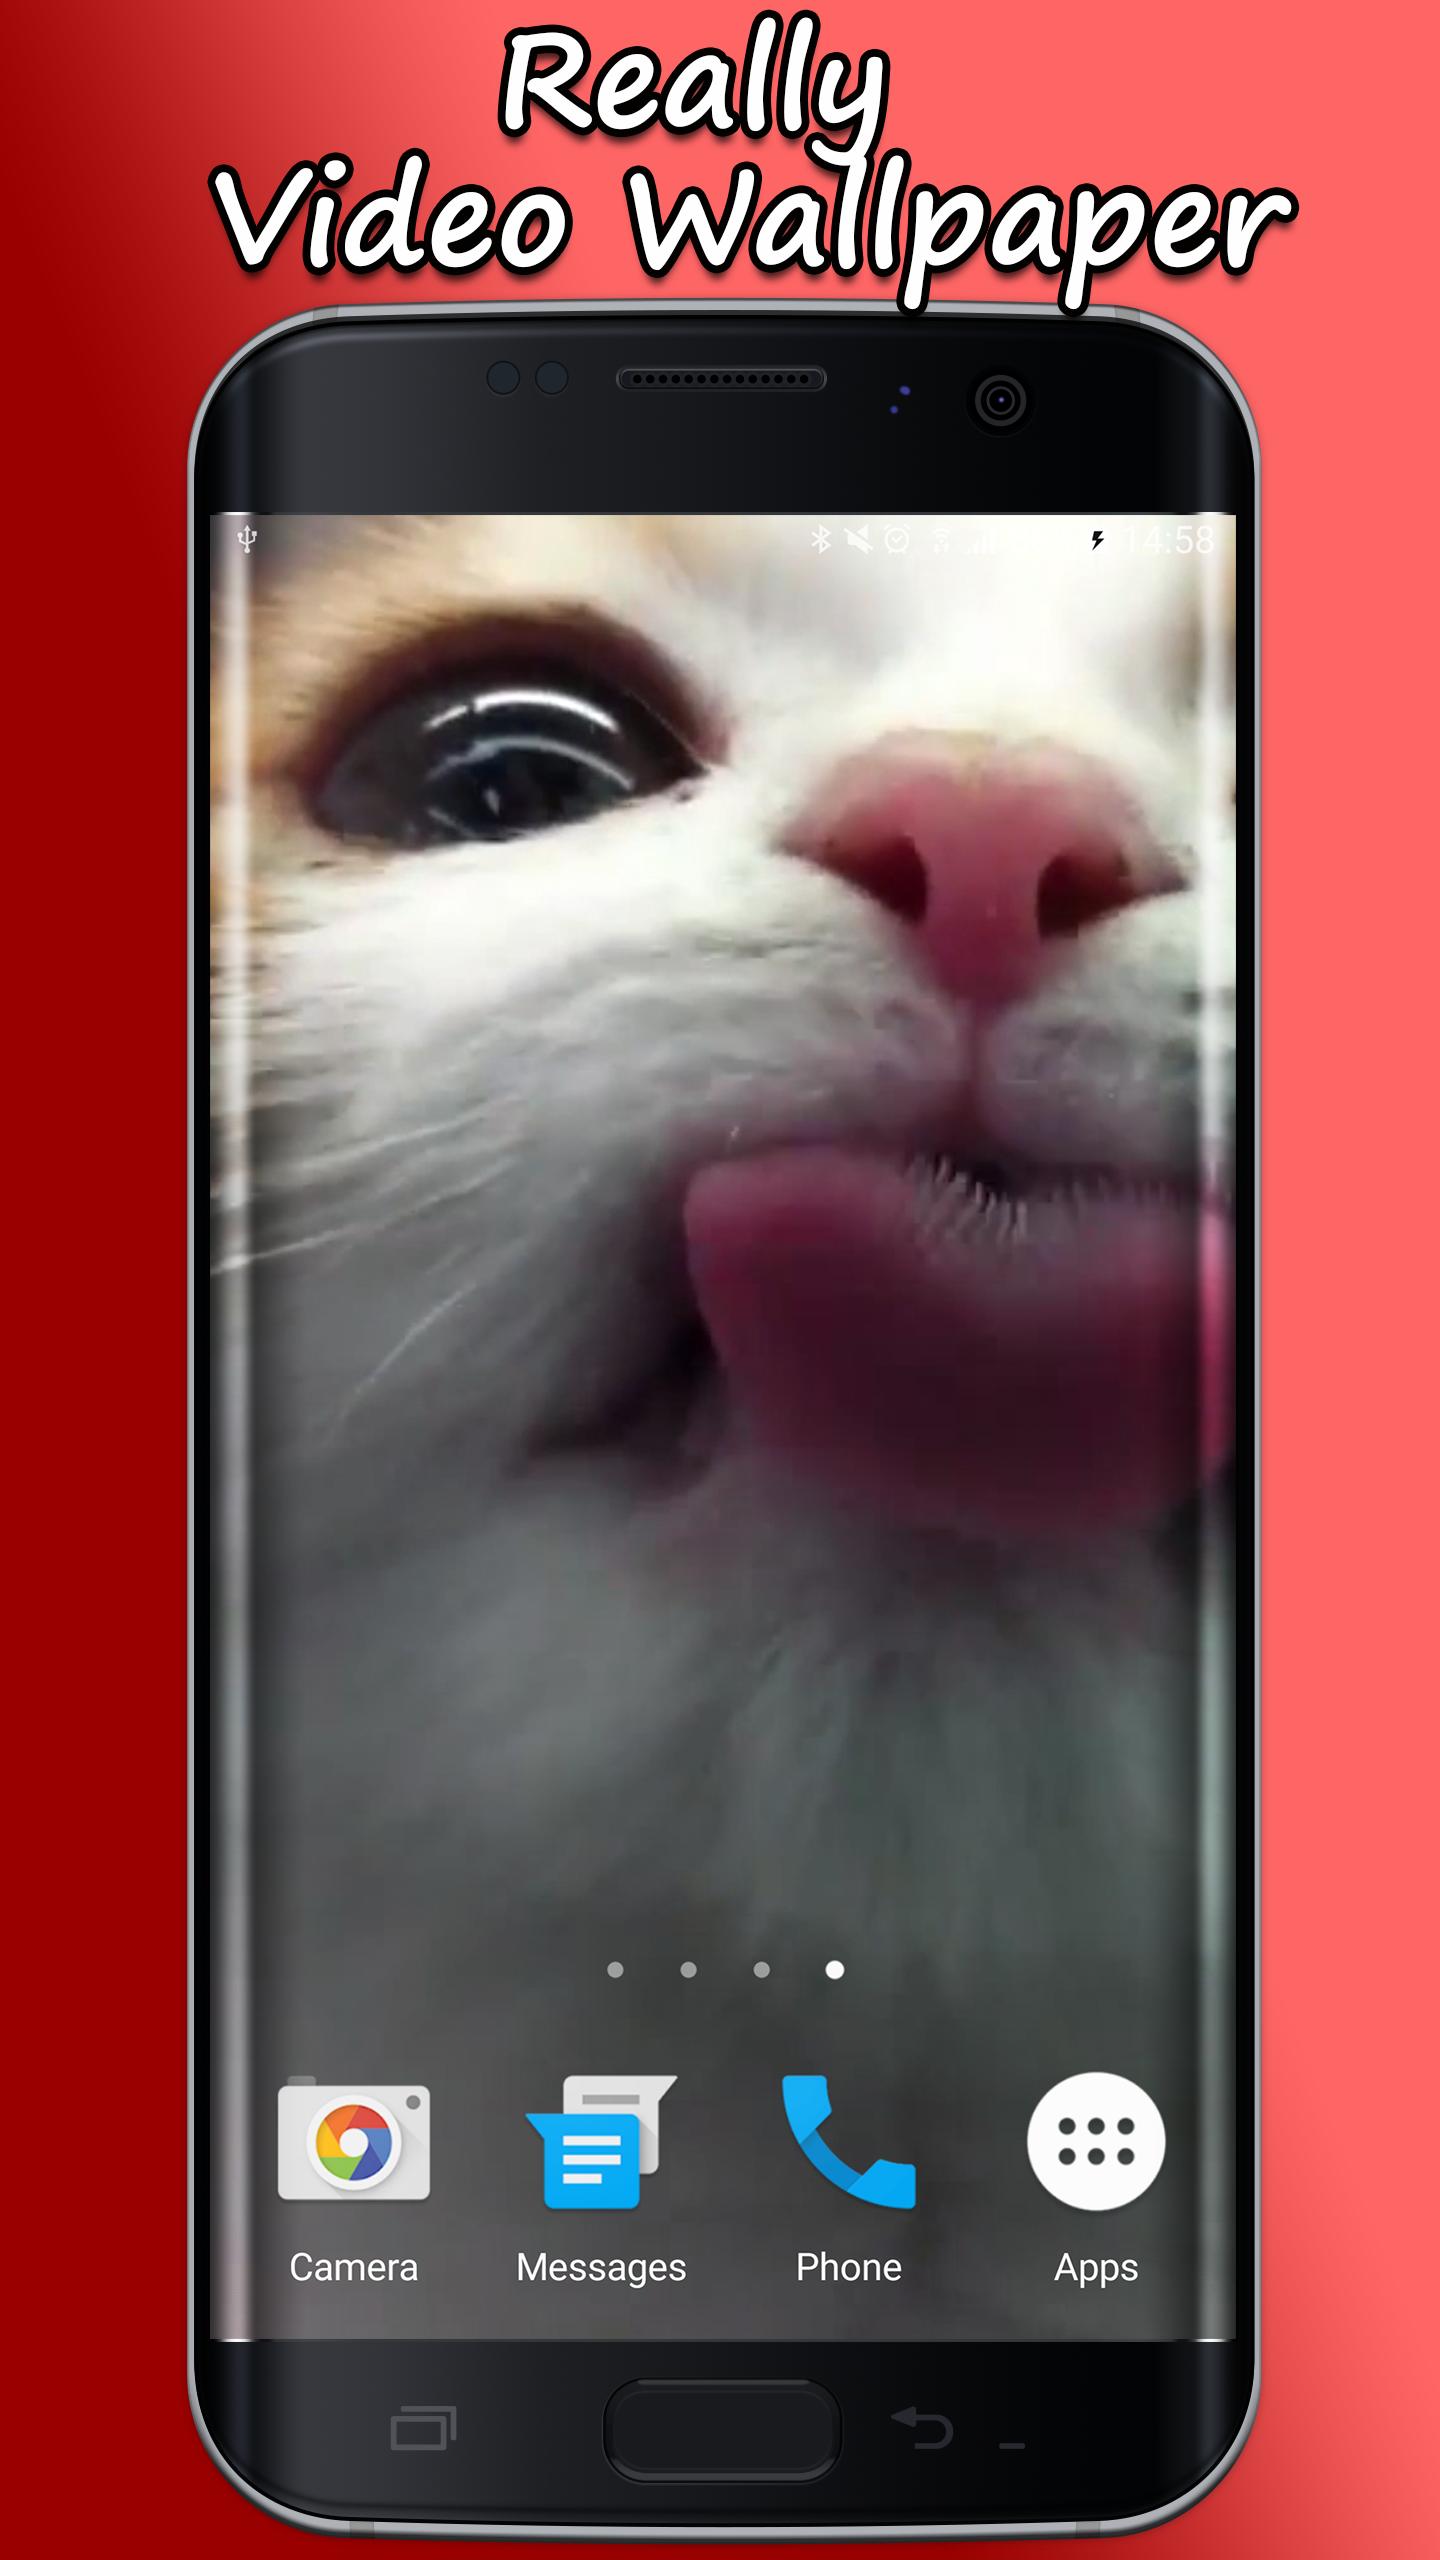 Cat Lick Screen Live Wallpaper For Android Apk Download Images, Photos, Reviews